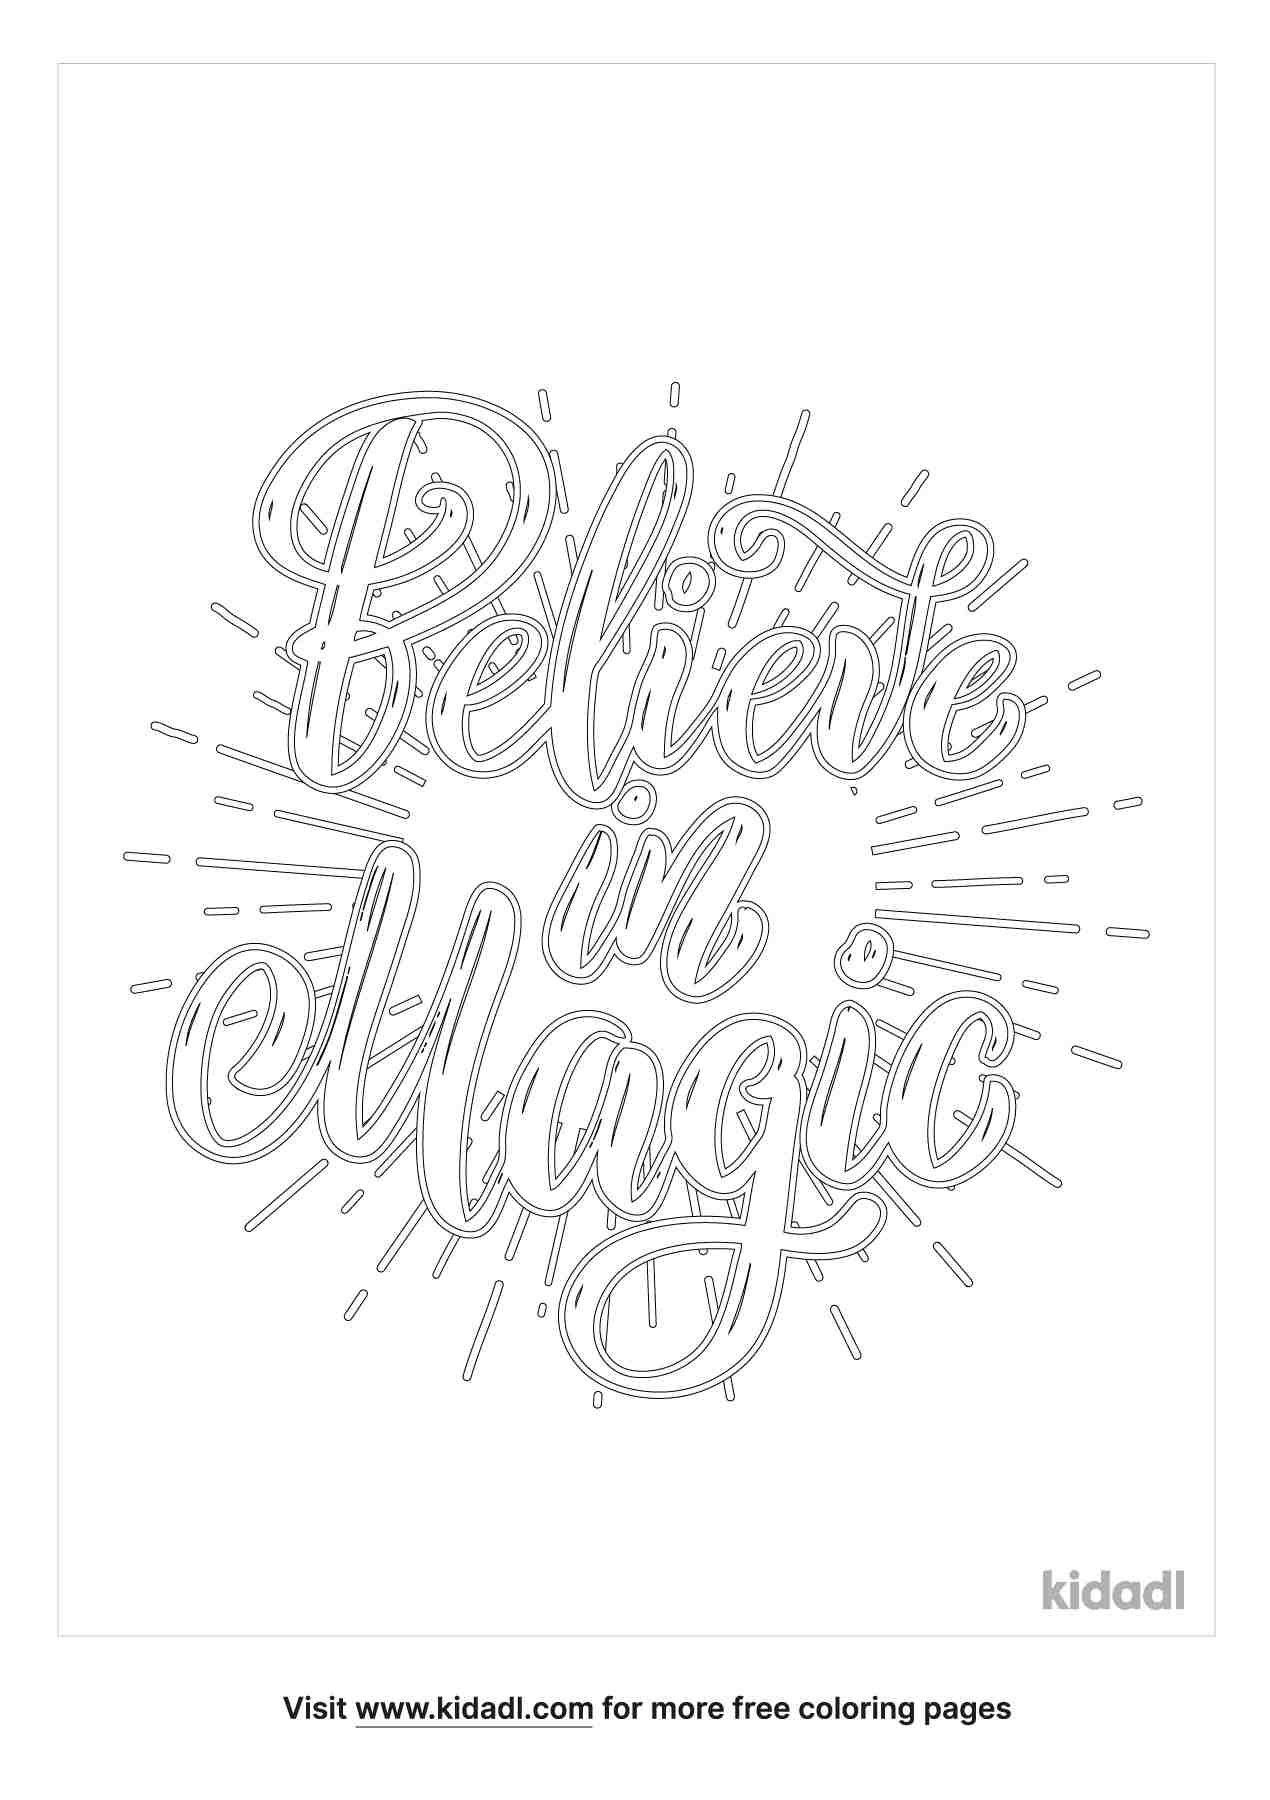 Believe in Magic doodle and coloring page.